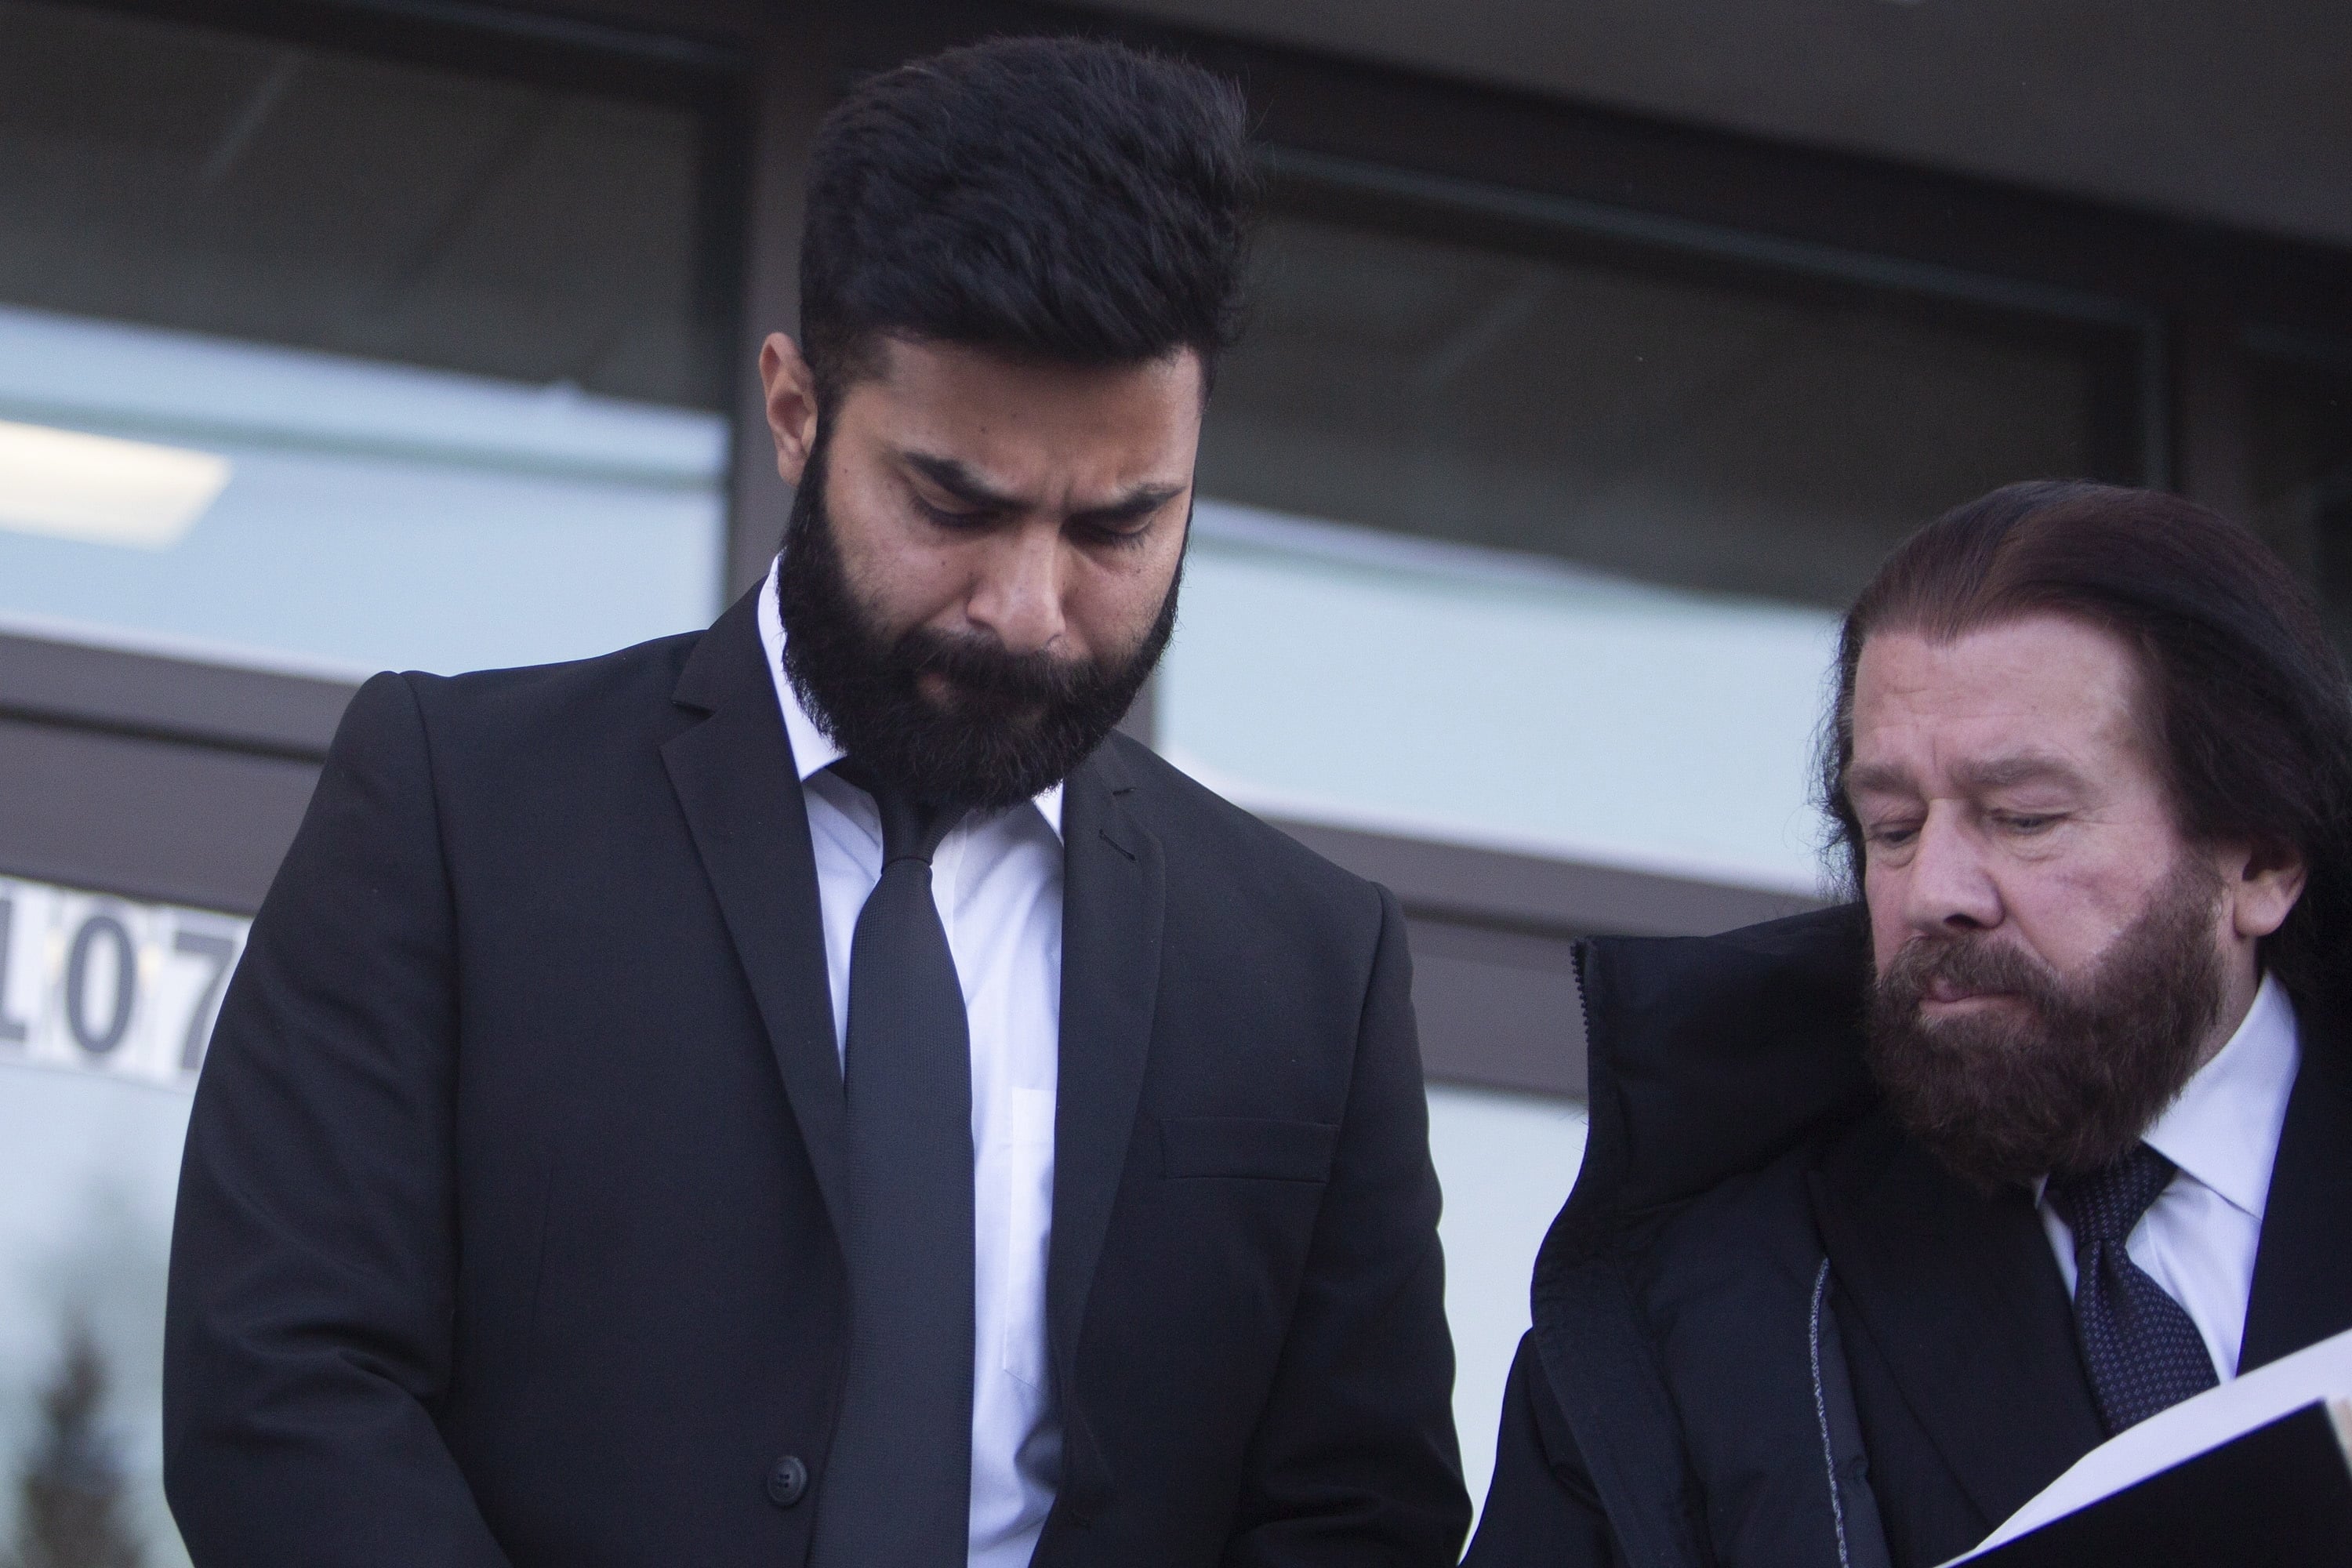 Jaskirat Singh Sidhu leaves provincial court with his lawyer Mark Brayford, right, in Melfort, Saskatchewan, Tuesday, Jan. 8, 2019. Sidhu, the driver of a transport truck involved in a bus crash that killed 16 people with the Humboldt Broncos junior hockey team in Canada last year has has pleaded guilty to all charges against him. Sidhu was charged with 16 counts of dangerous driving causing death and 13 charges of dangerous driving causing bodily harm.